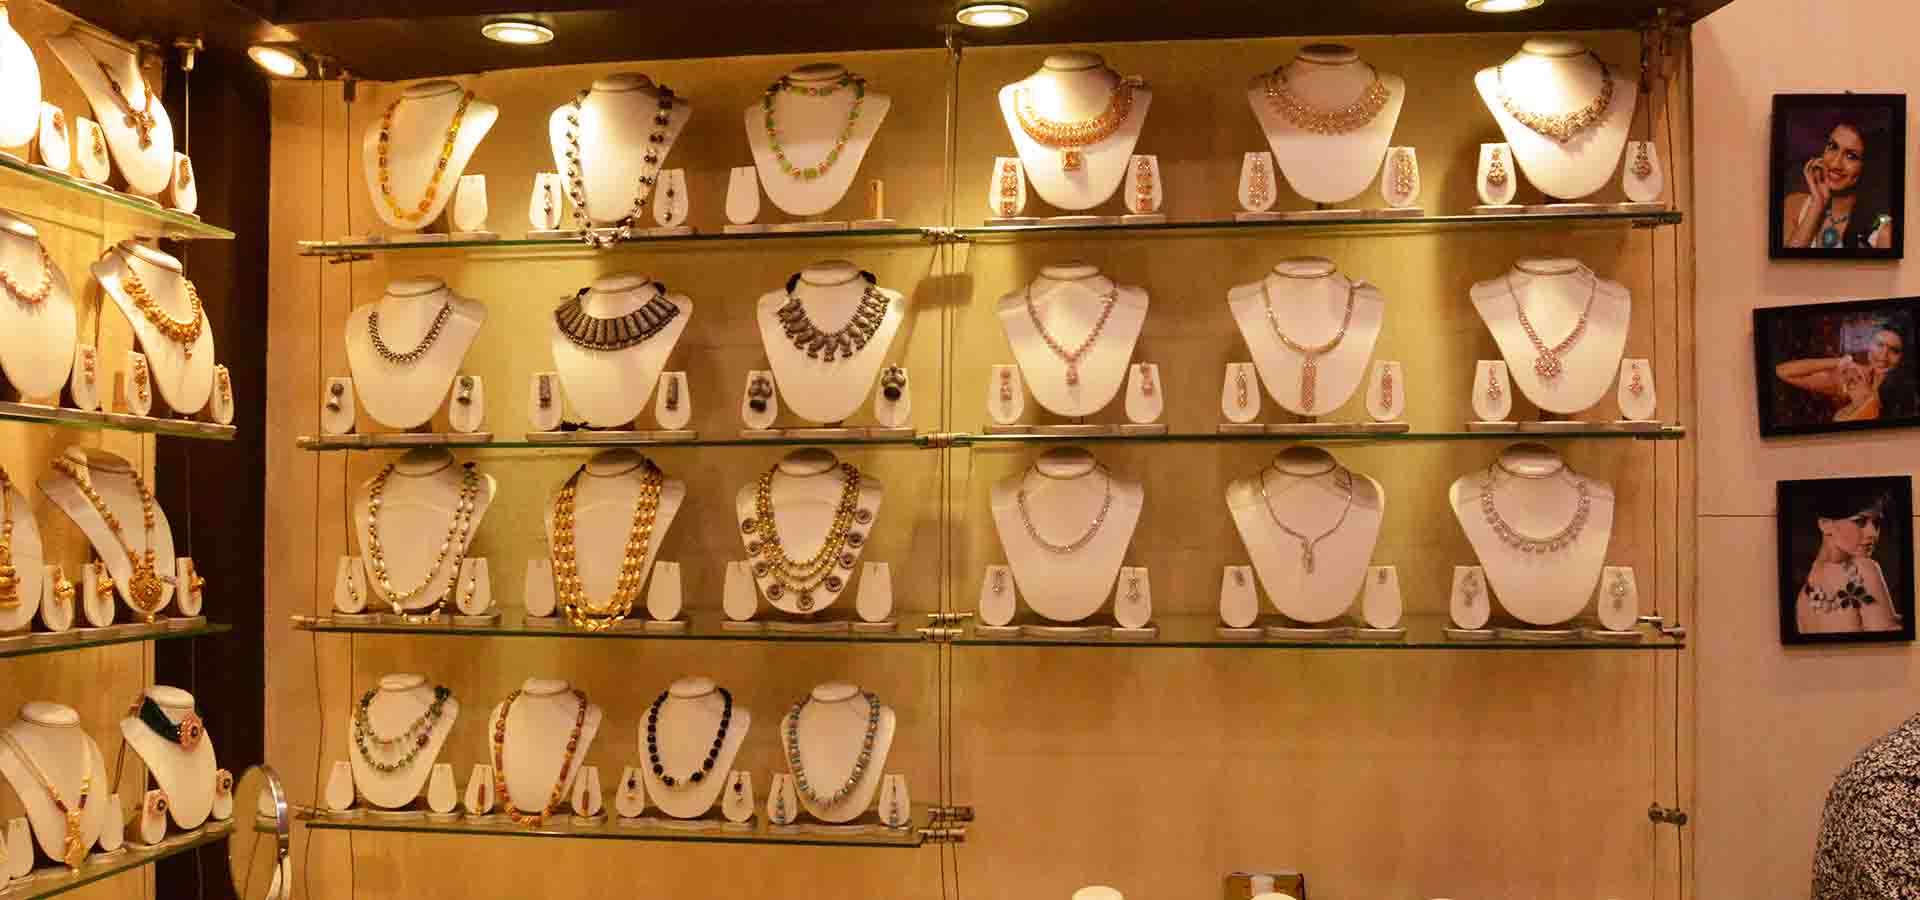 Saakshi store photos in mall